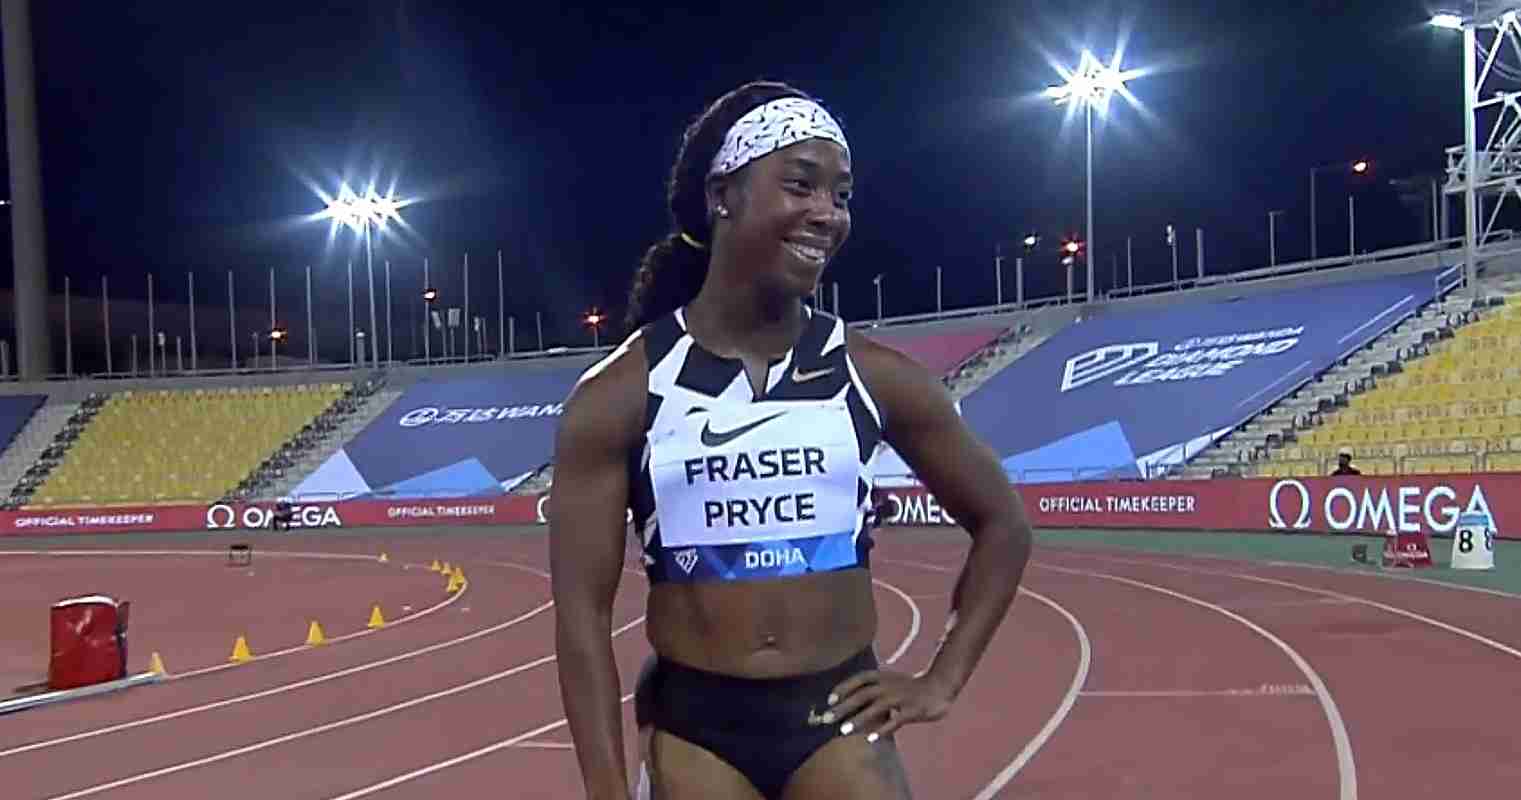 Fraser-Pryce to debut at Oslo Diamond League